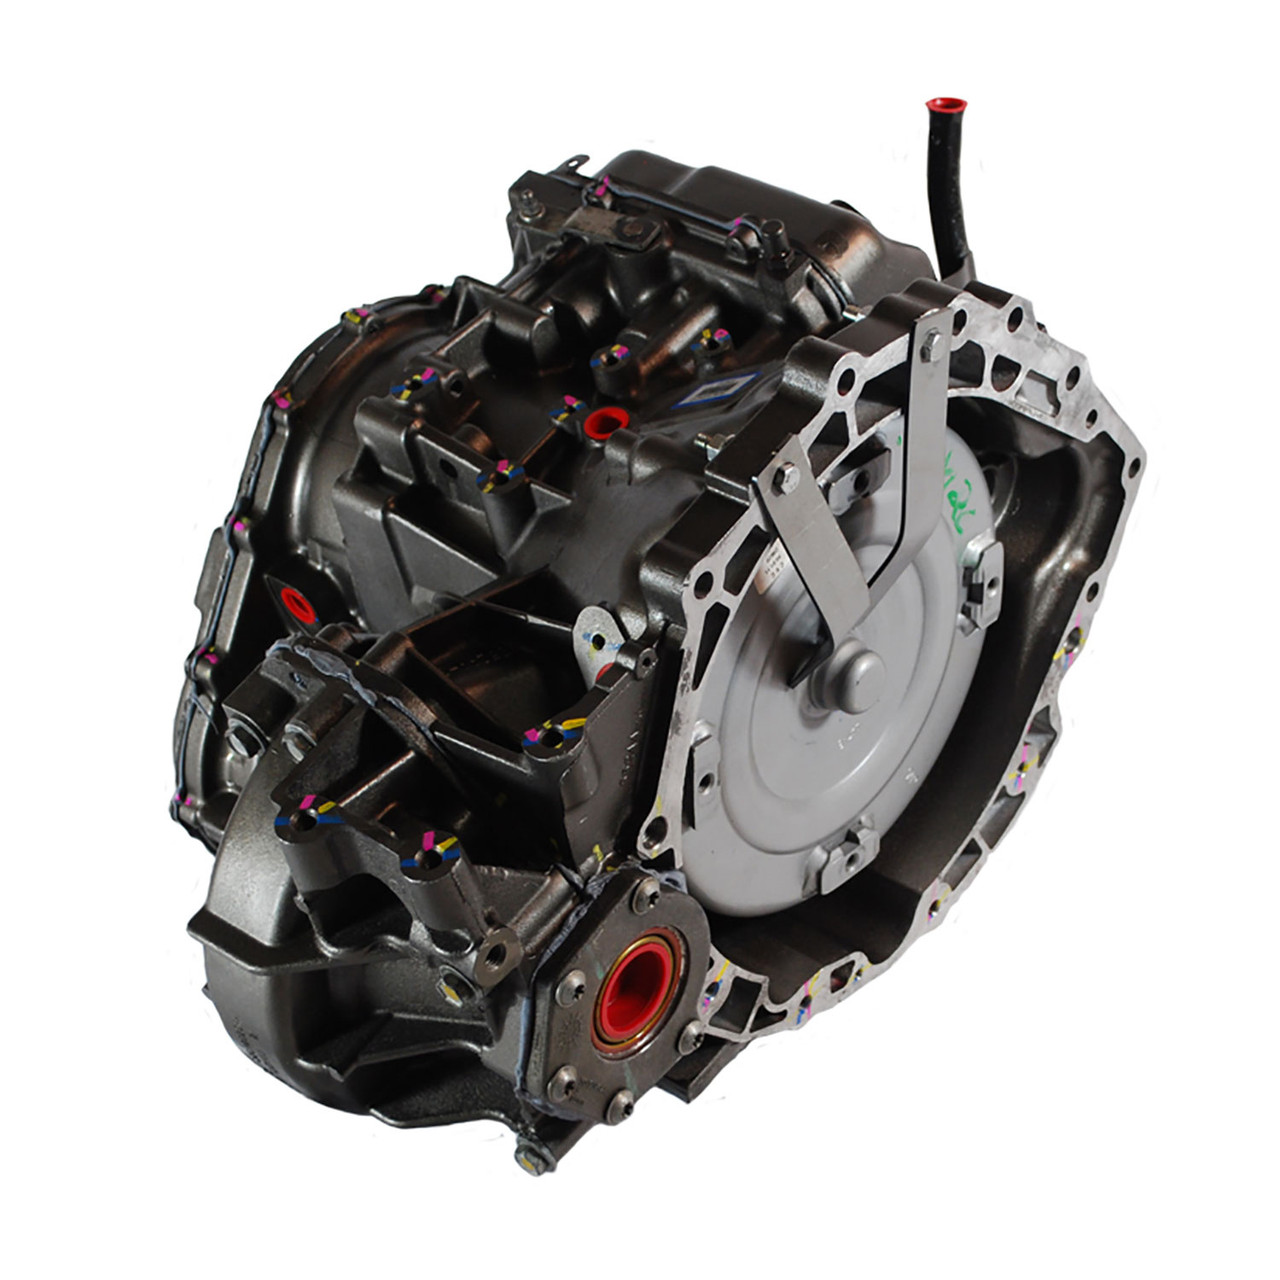 Remanufactured 62TE Transmissions